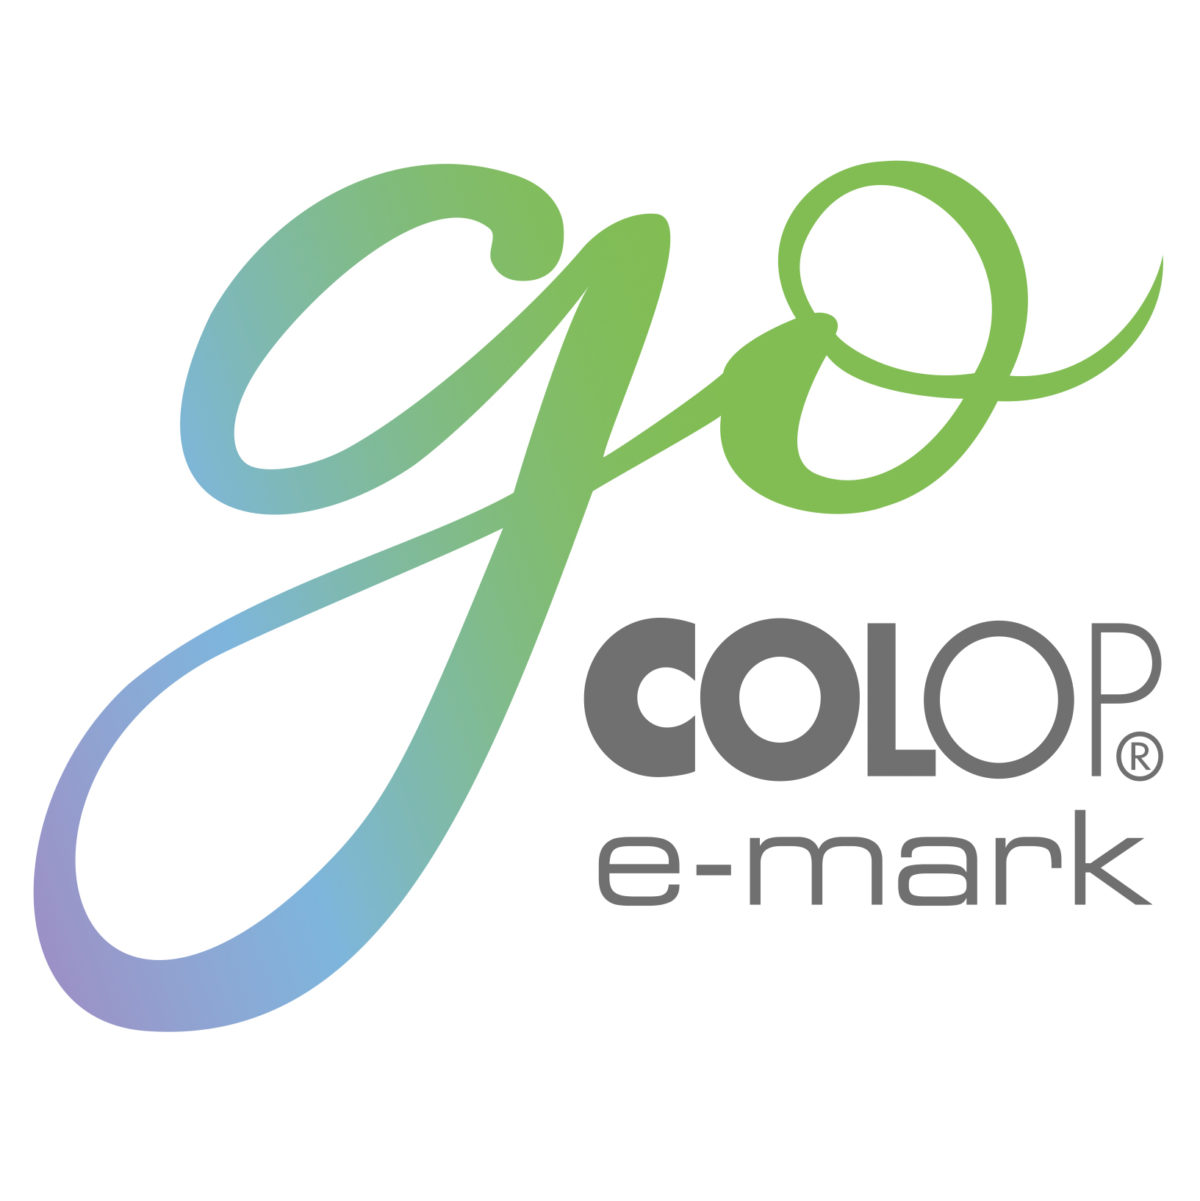 Colop Emark